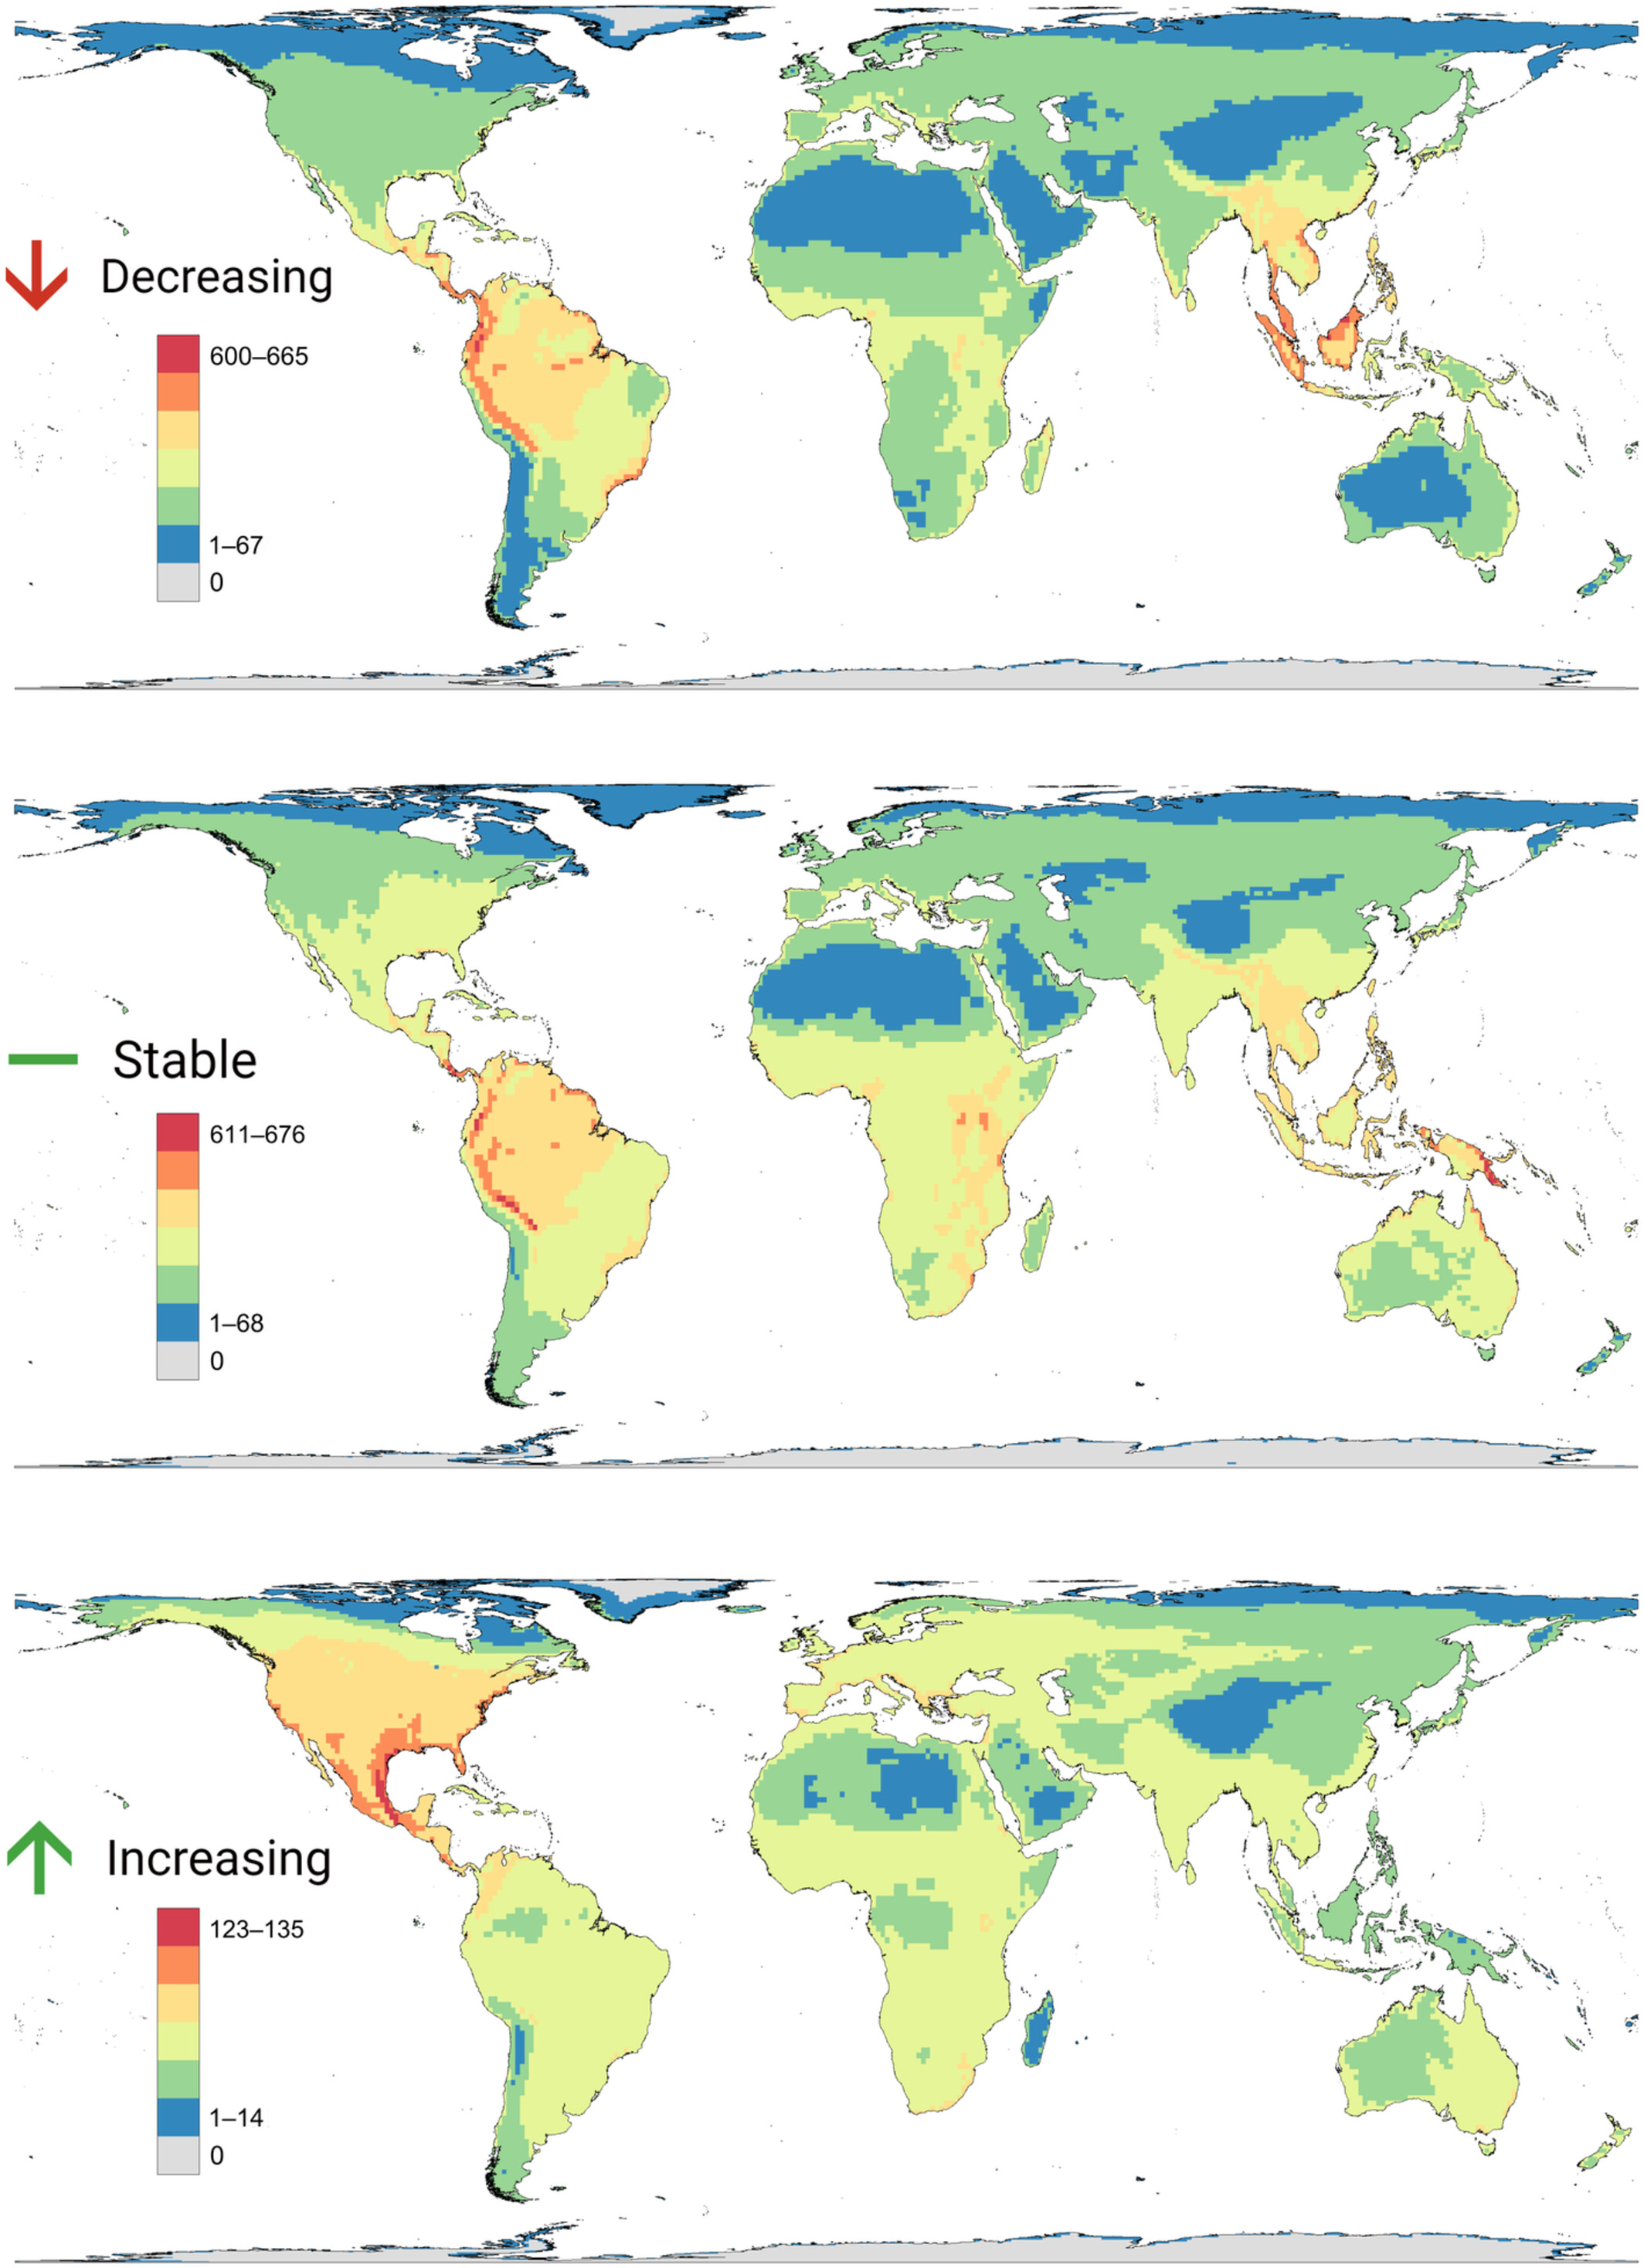 Maps showing the global distribution of animals with decreasing (top), stable (middle) or increasing (bottom) populations combining data from all taxonomic groups. Numbers of species were counted within each 1° × 1° grid cell covering the globe, using a Behrmann’s equal area projection. Graphic: Finn, et al., 2023 / Biological Reviews